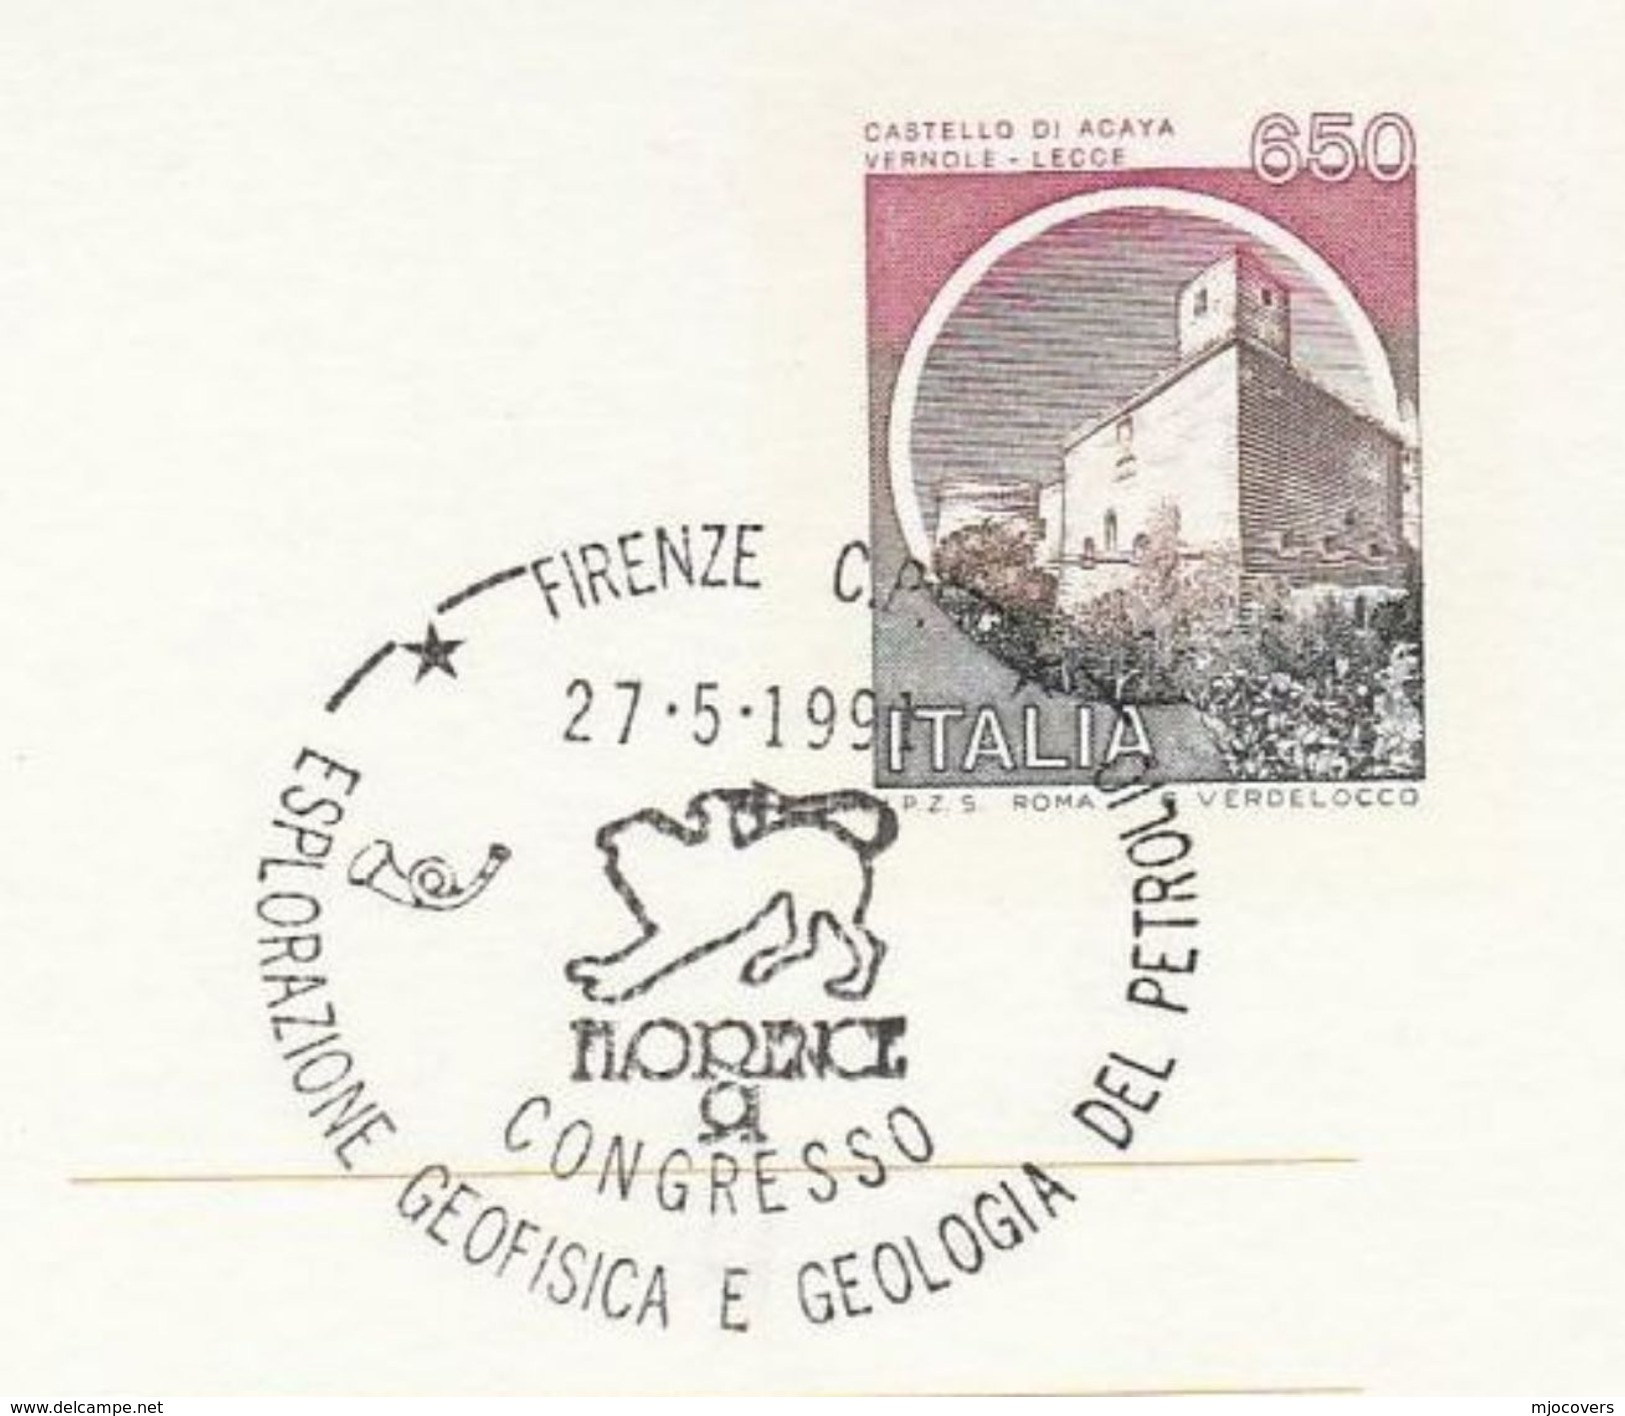 1991 Firenze OIL EXPLORATION GEOPHYSICS CONGRESS Event COVER Italy Geology Stationery Stamp Petroleum Minerals Energy - Oil